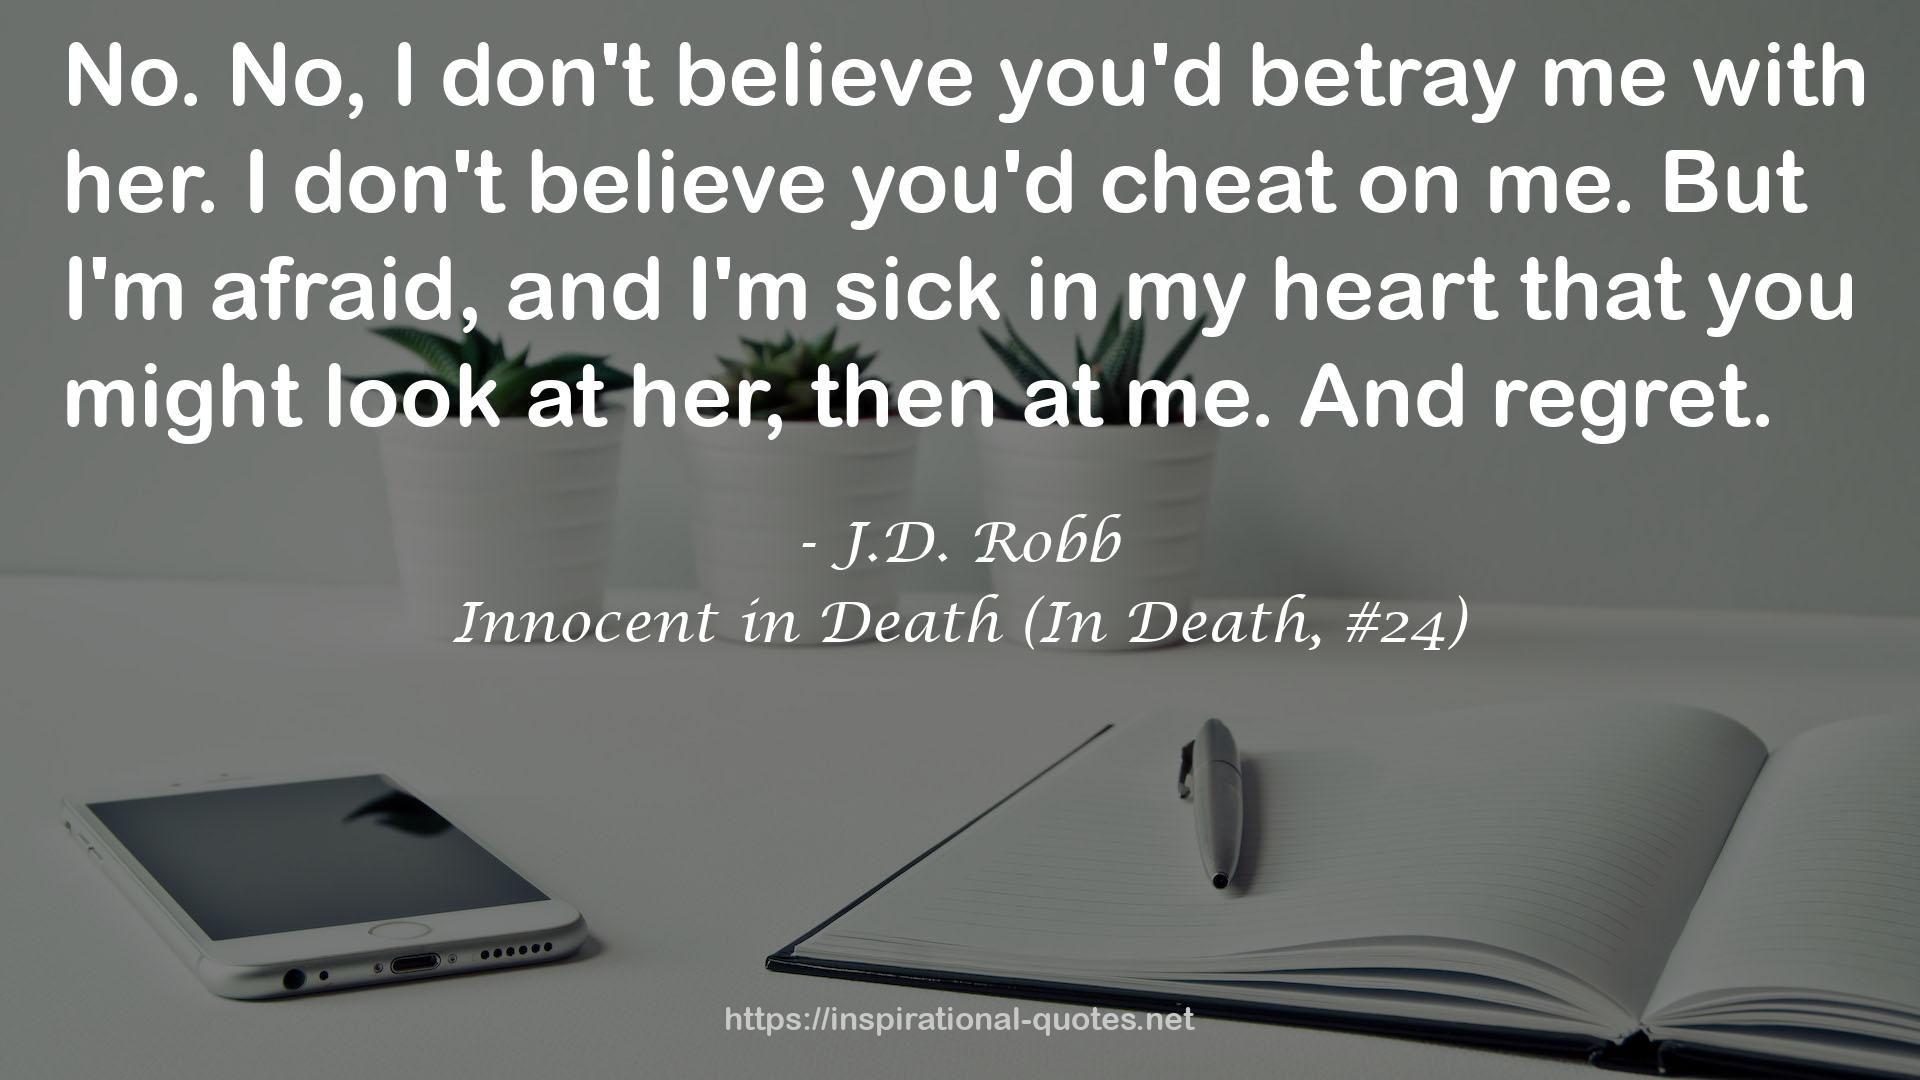 Innocent in Death (In Death, #24) QUOTES